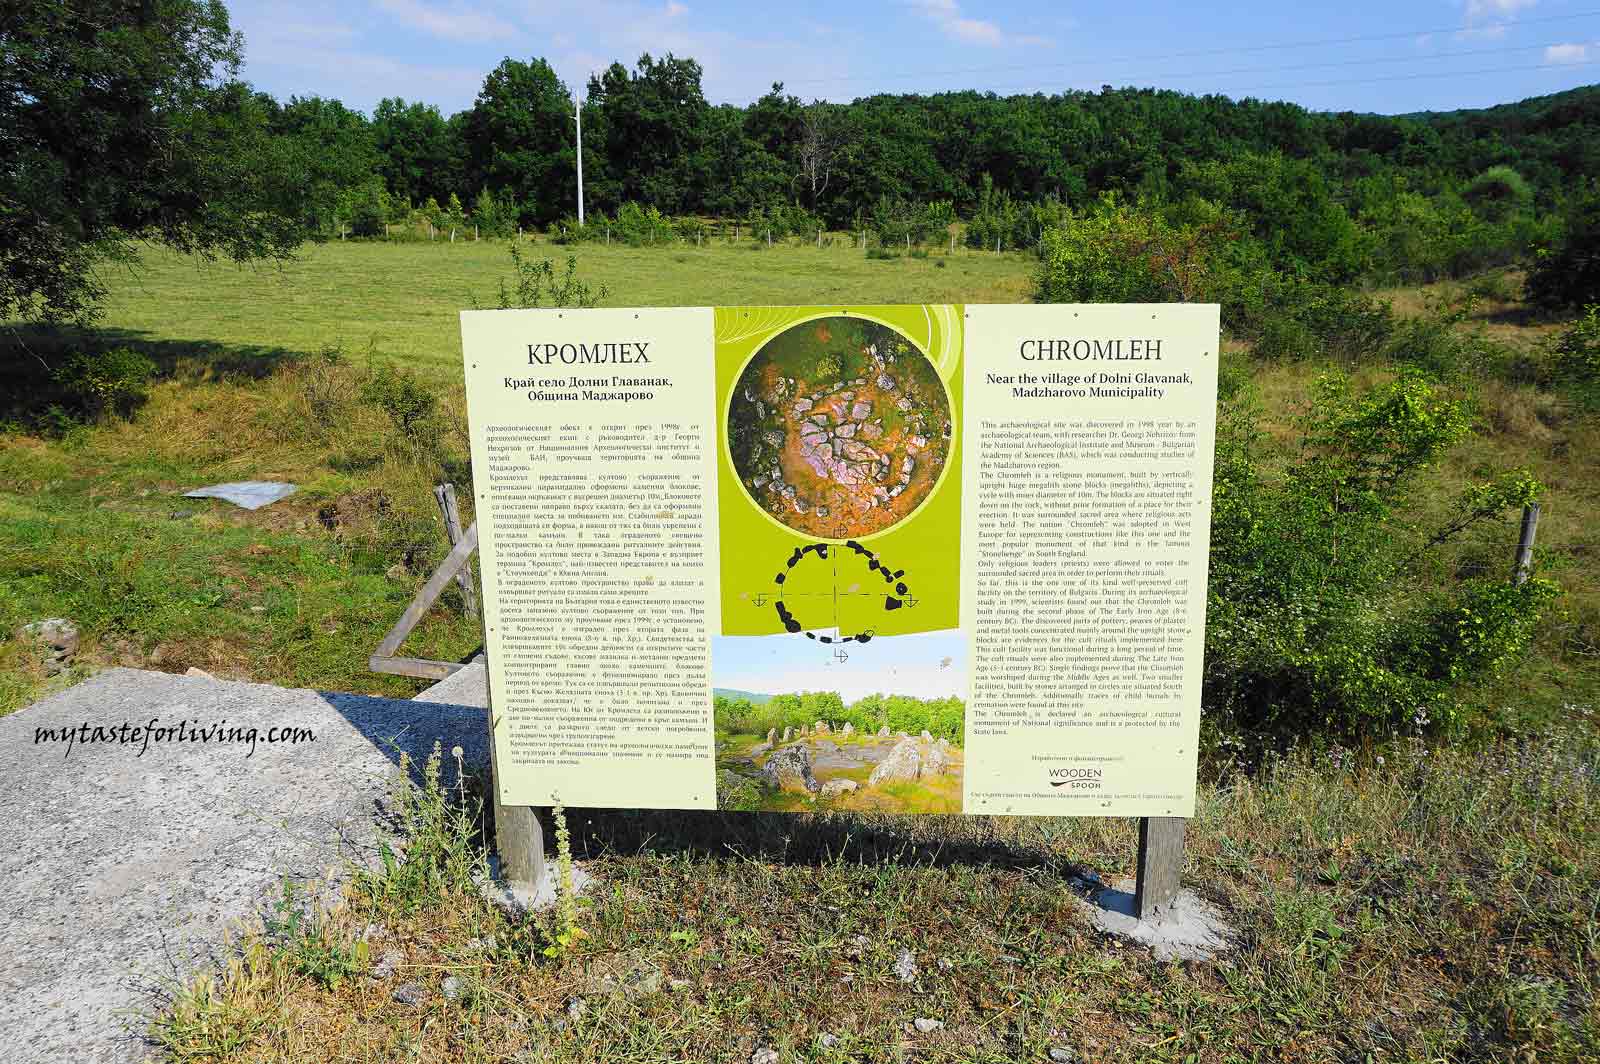 The best-preserved cromlech in Bulgaria is located in the Eastern Rhodopes between the villages of Dolni Glavanak and Topolovo, Madzharovo municipality. It is also called Bulgarian Stonehenge. It consists of 15 pyramidal-shaped stones arranged in an approximate circle, of varying heights, with the tallest stones being 1.5m high.